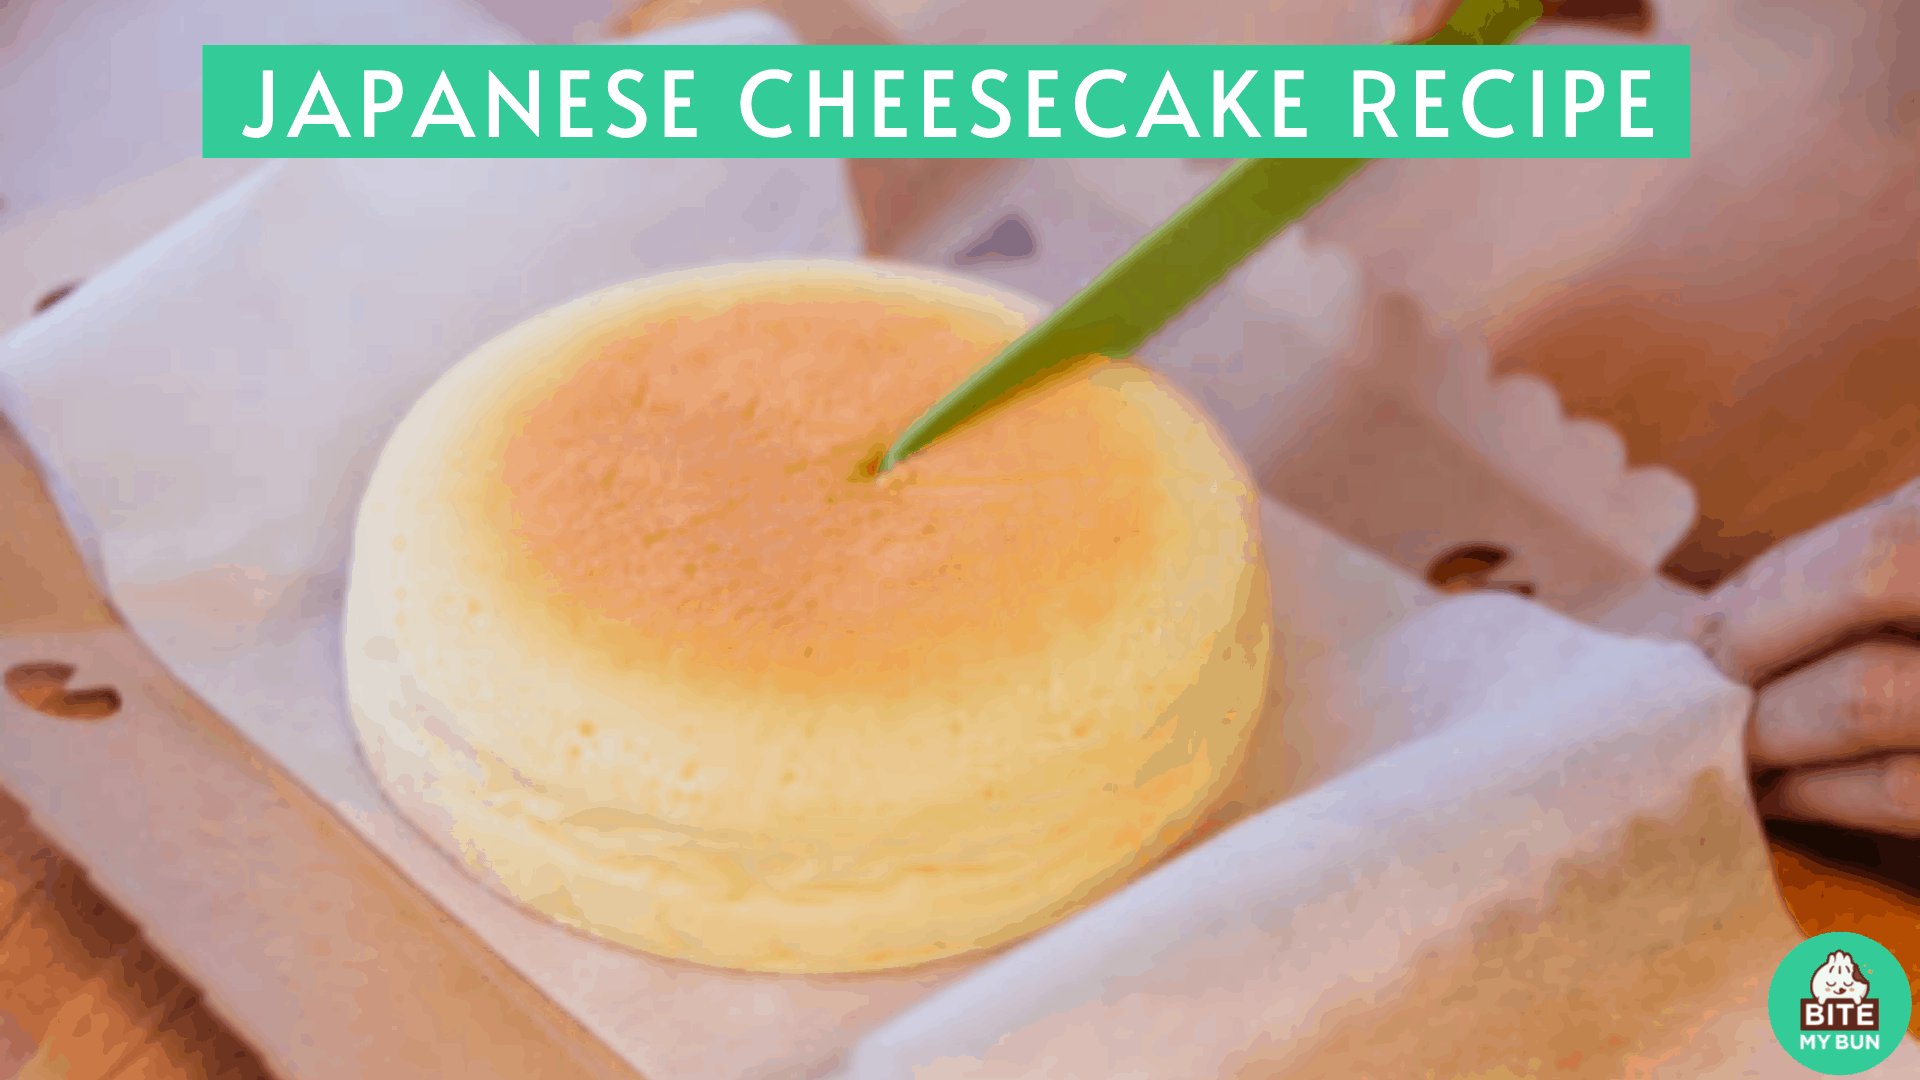 Japanese cheesecake recipe | Make this must-try deliciousness at home